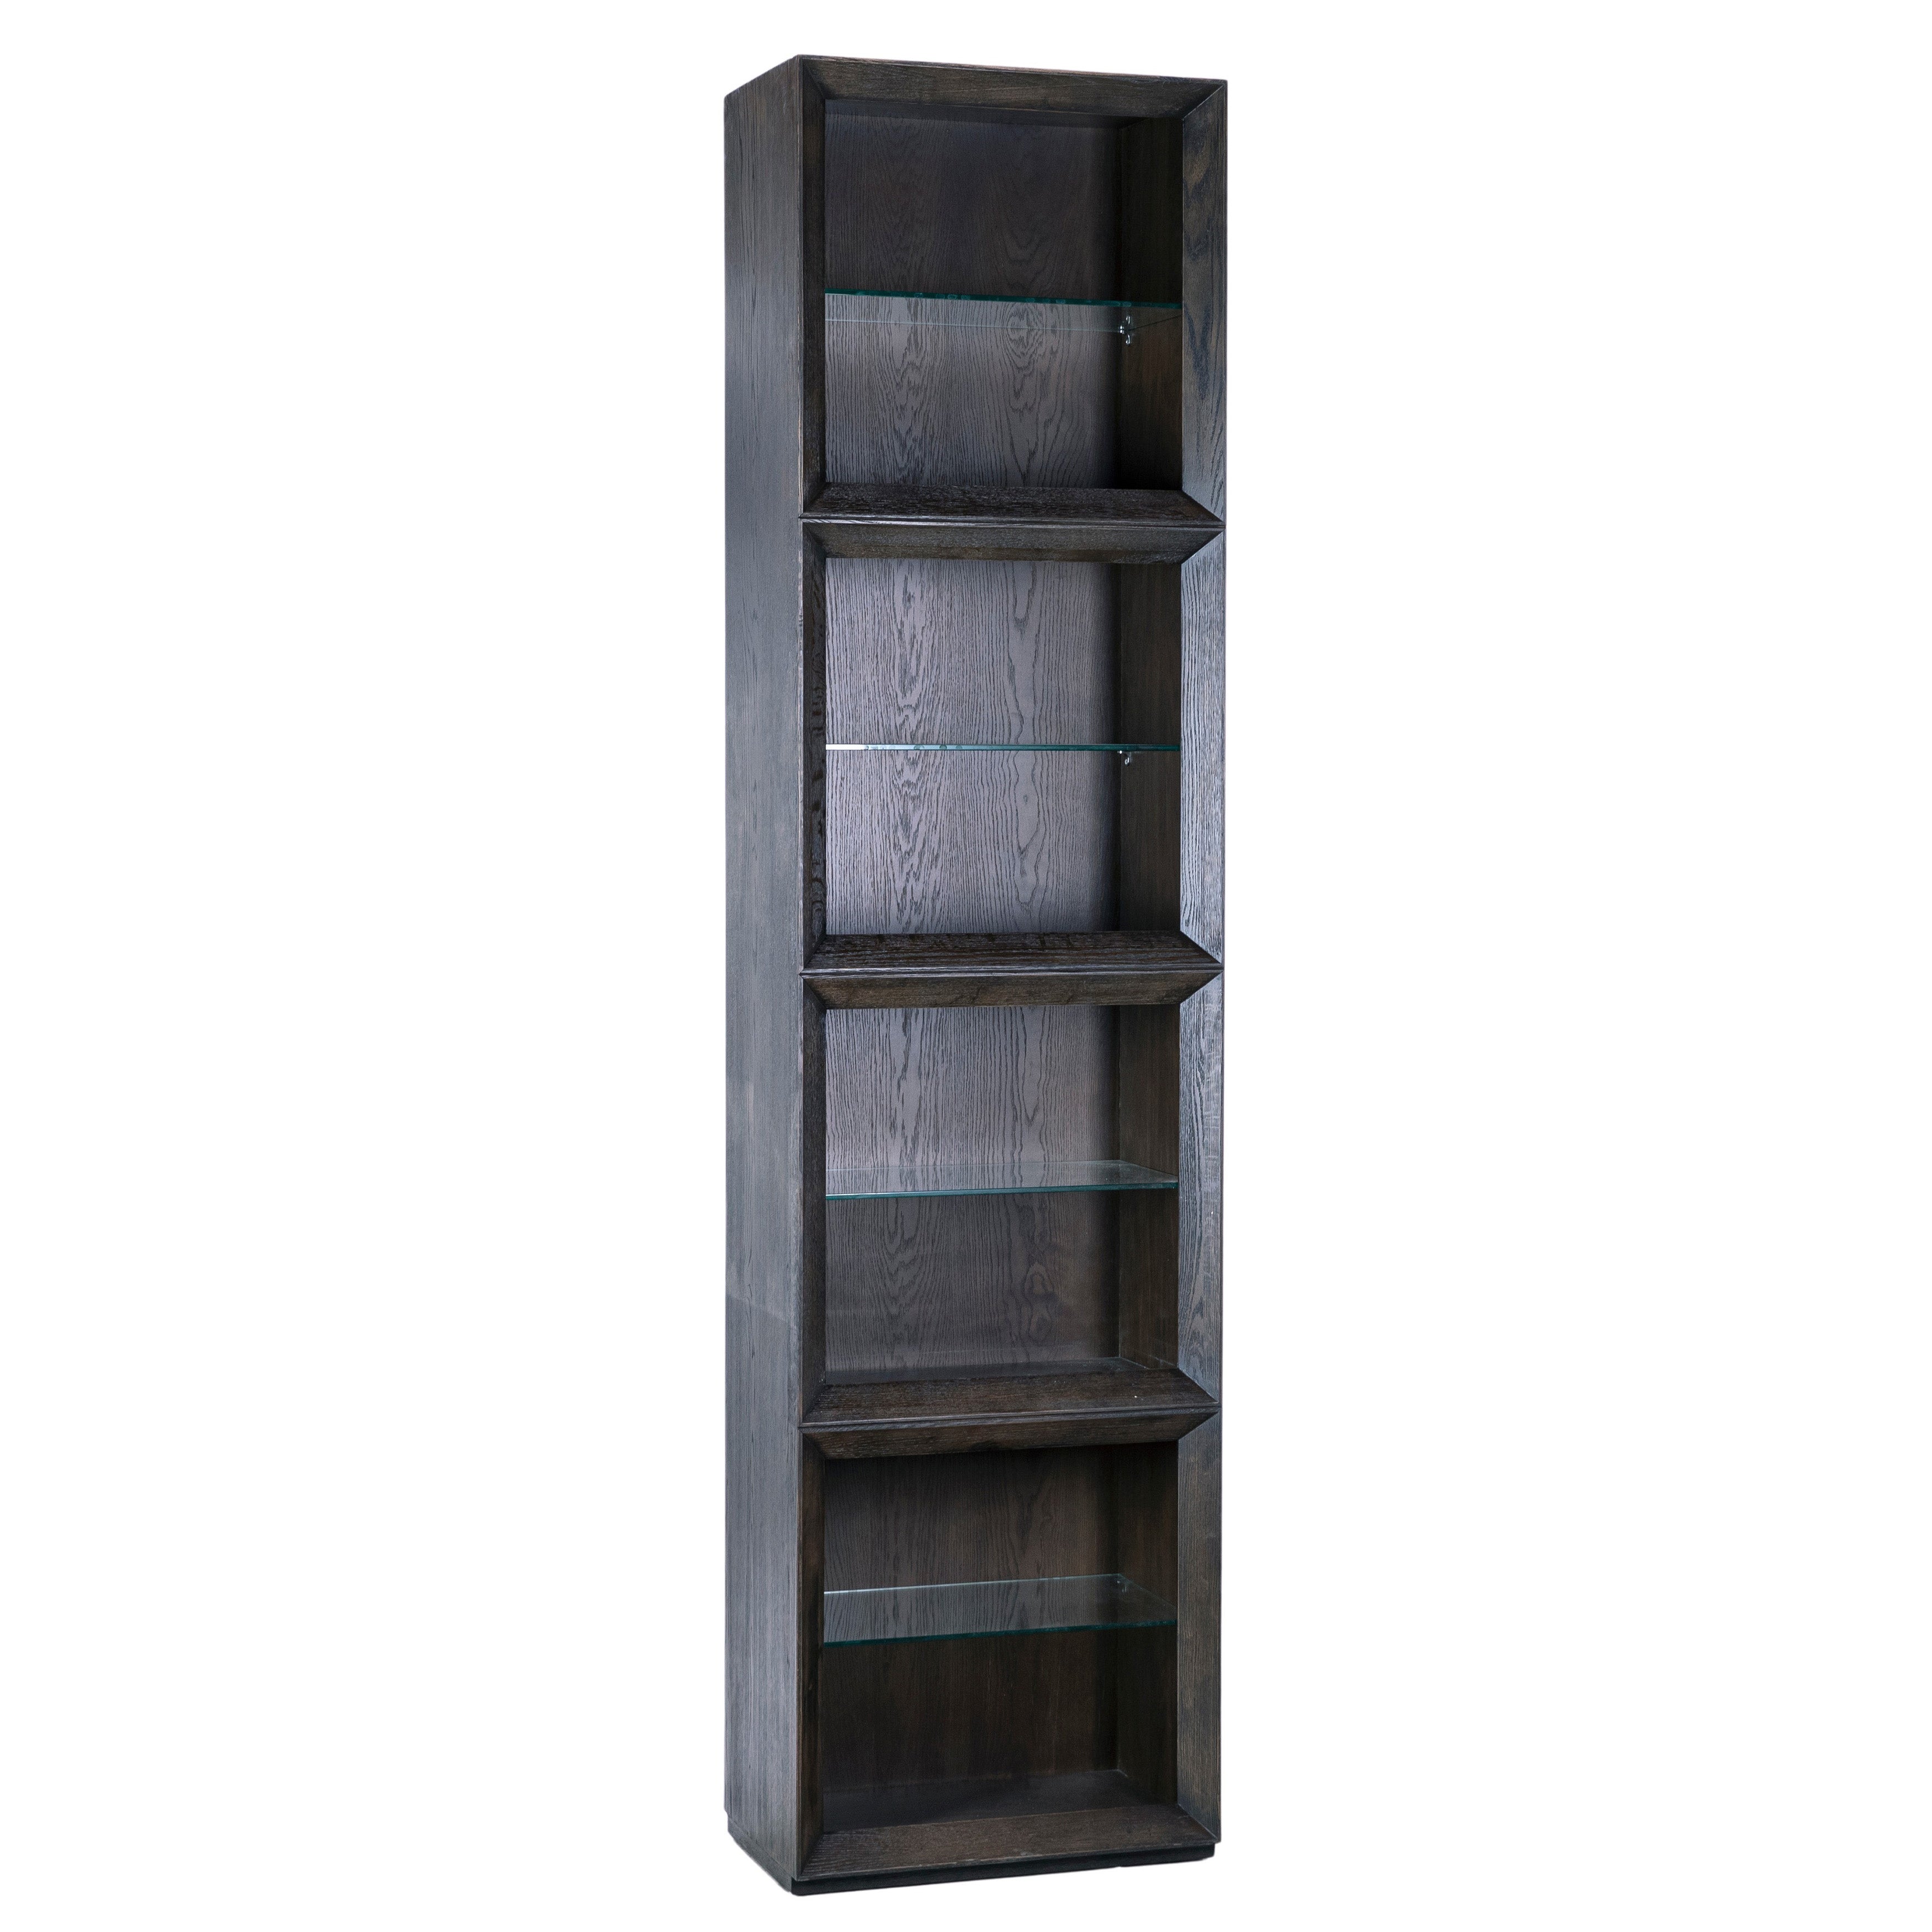 Eloa Bookcase - What A Room